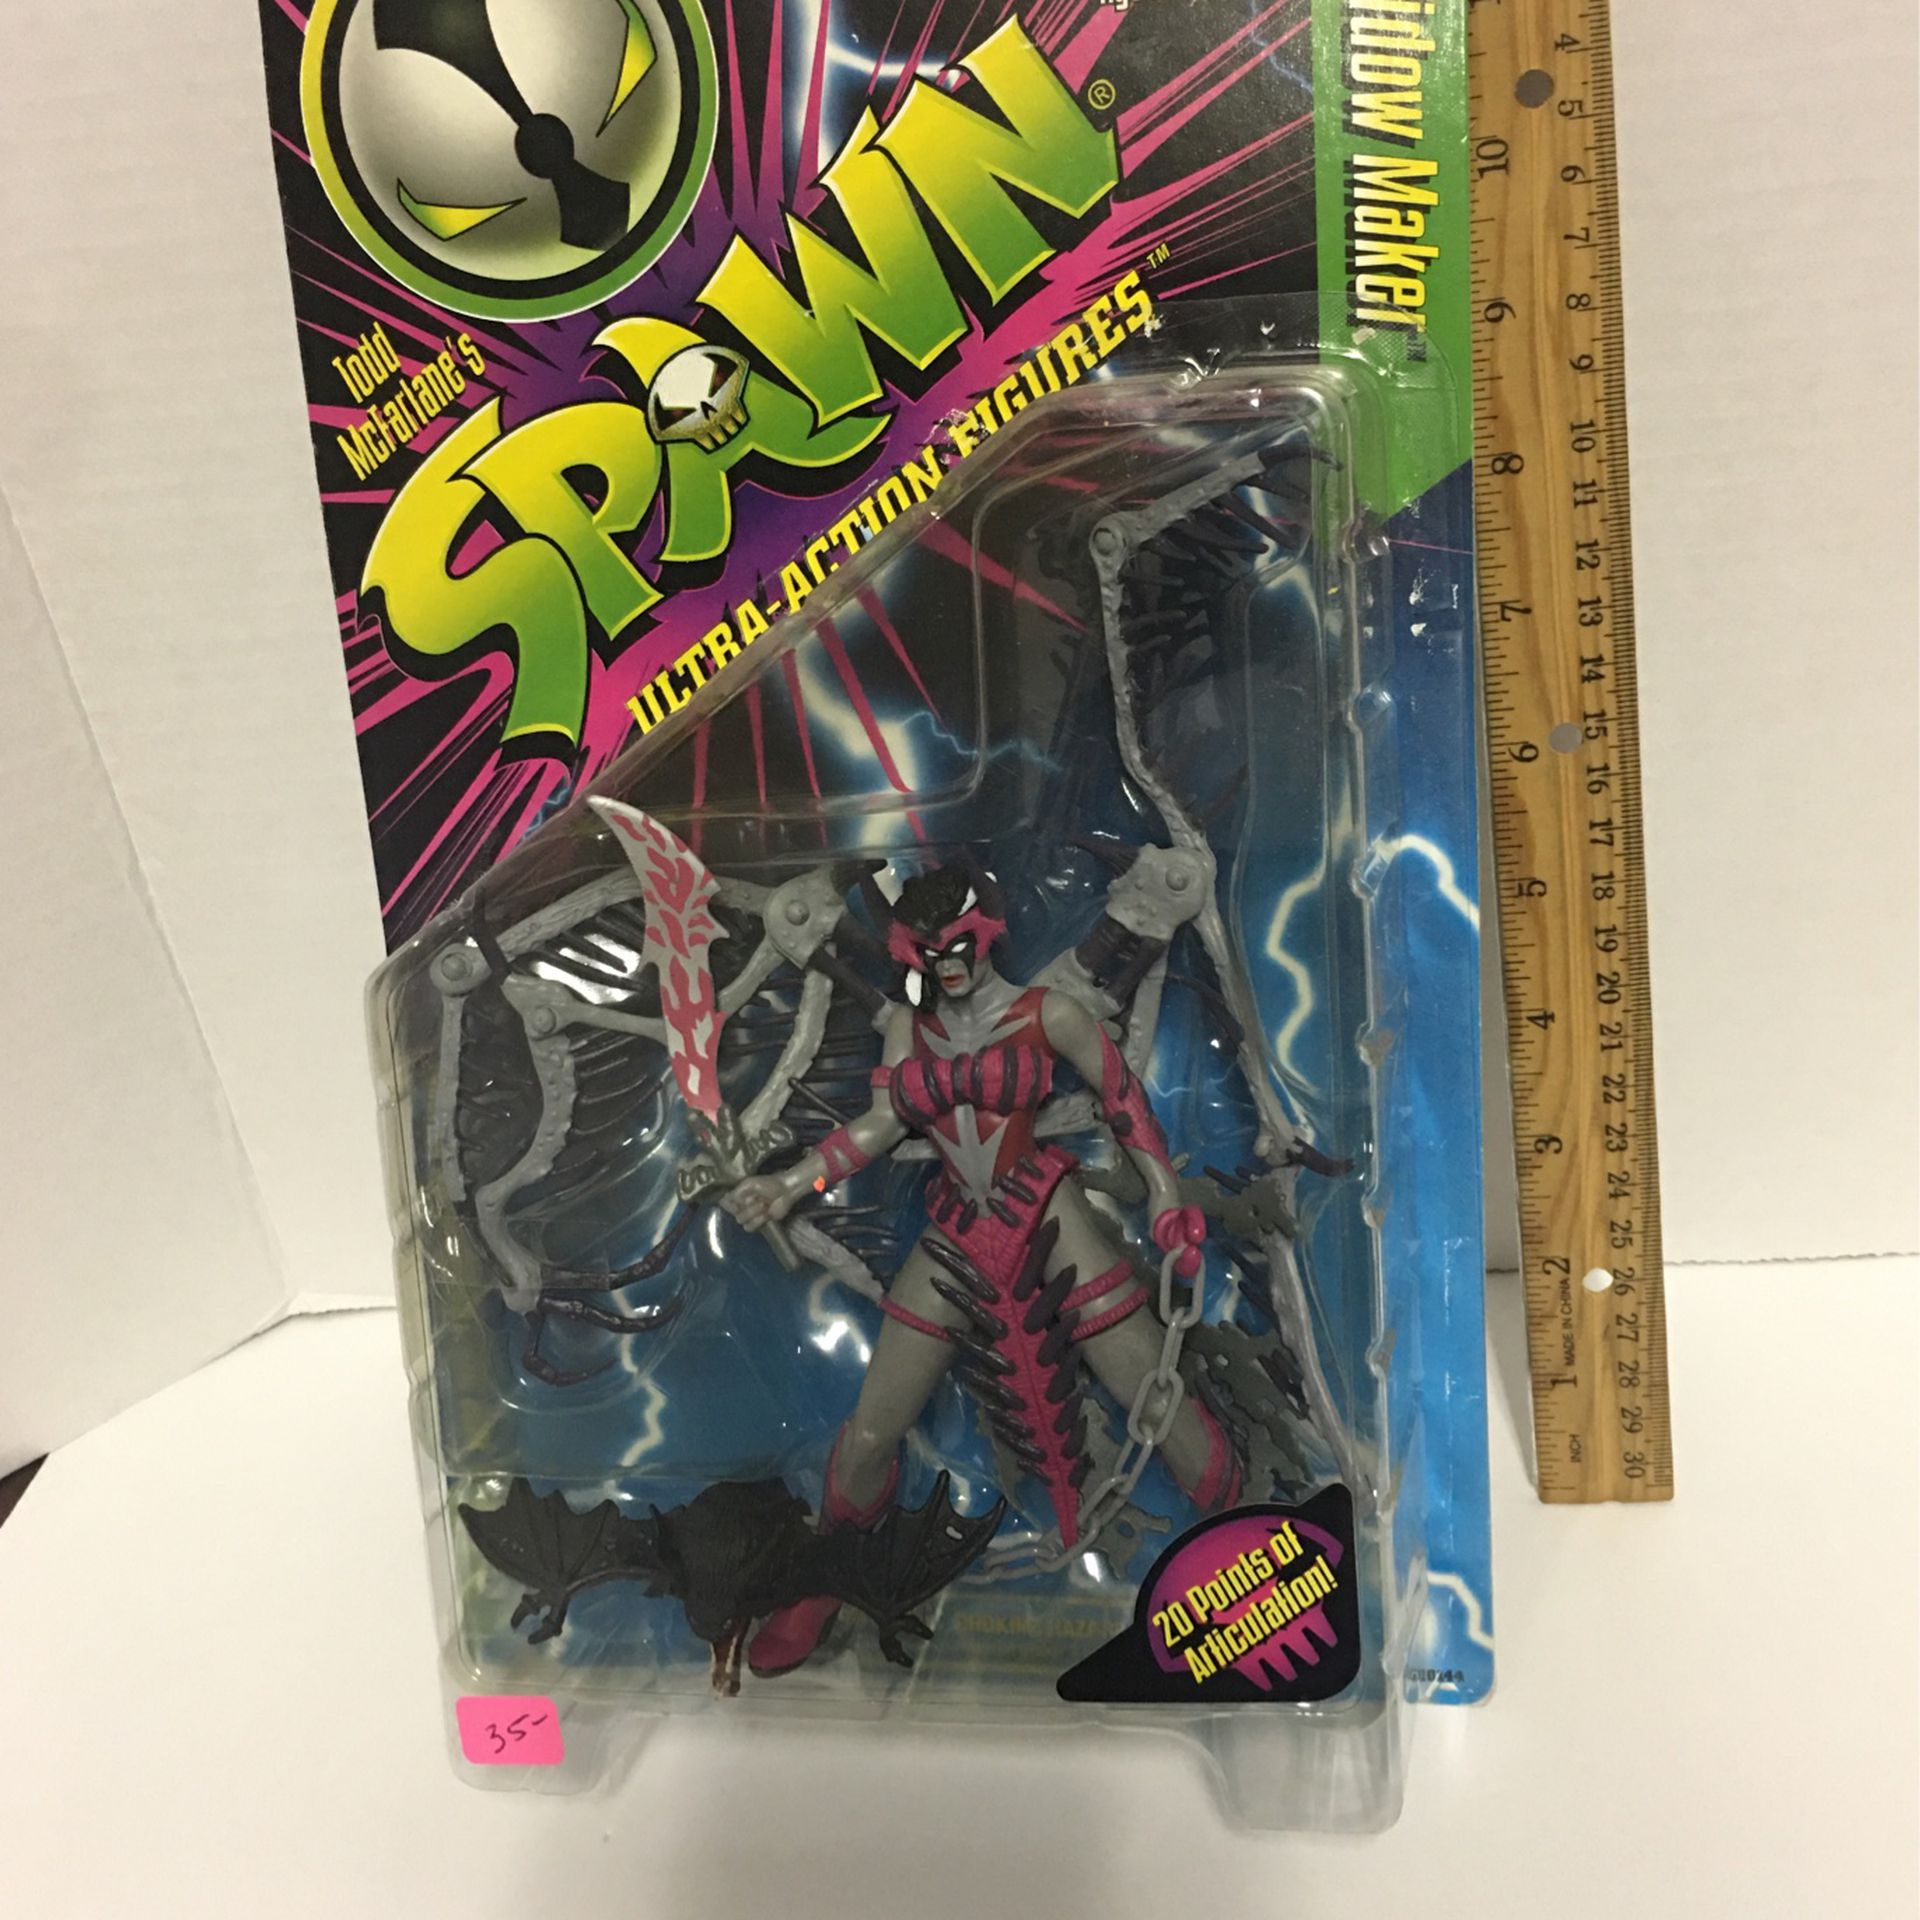 Todd McFarlane’s spawn ultra action figures